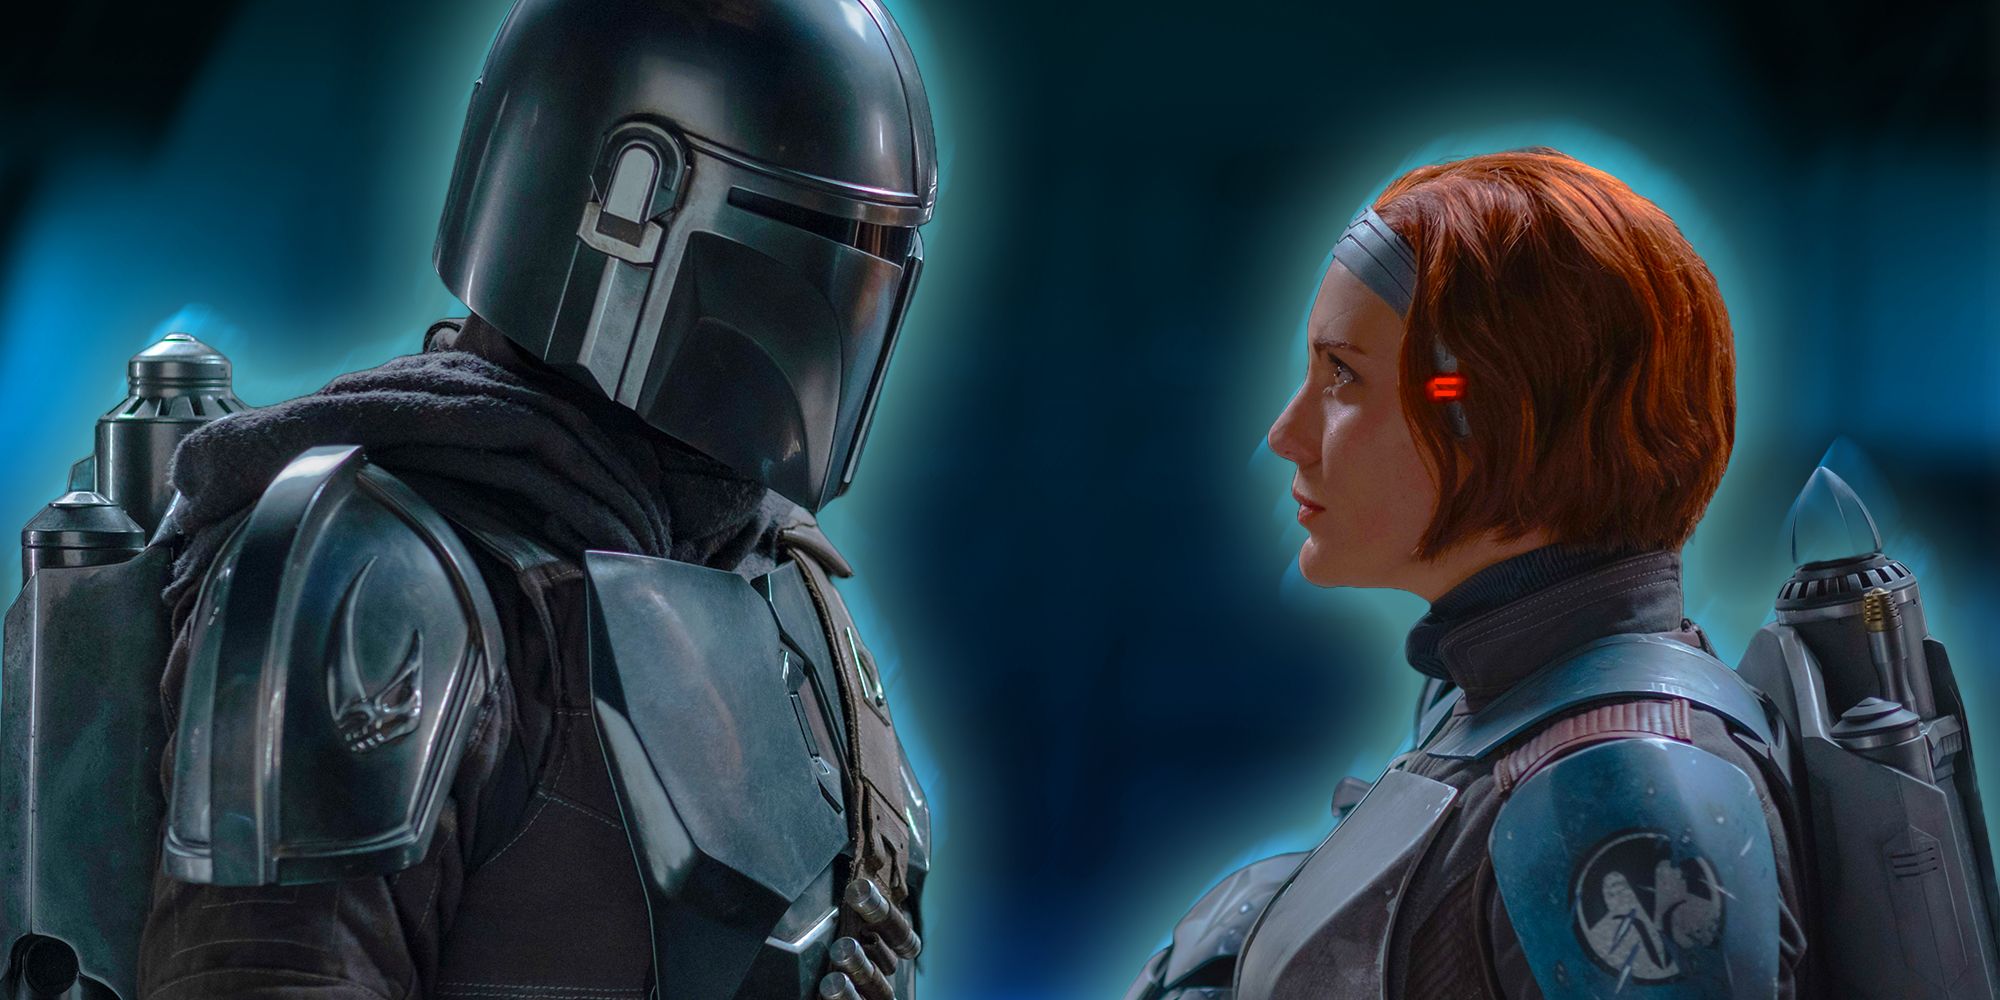 Din Djarin and Bo-Katan Kryze face each other on an Imperial vessel